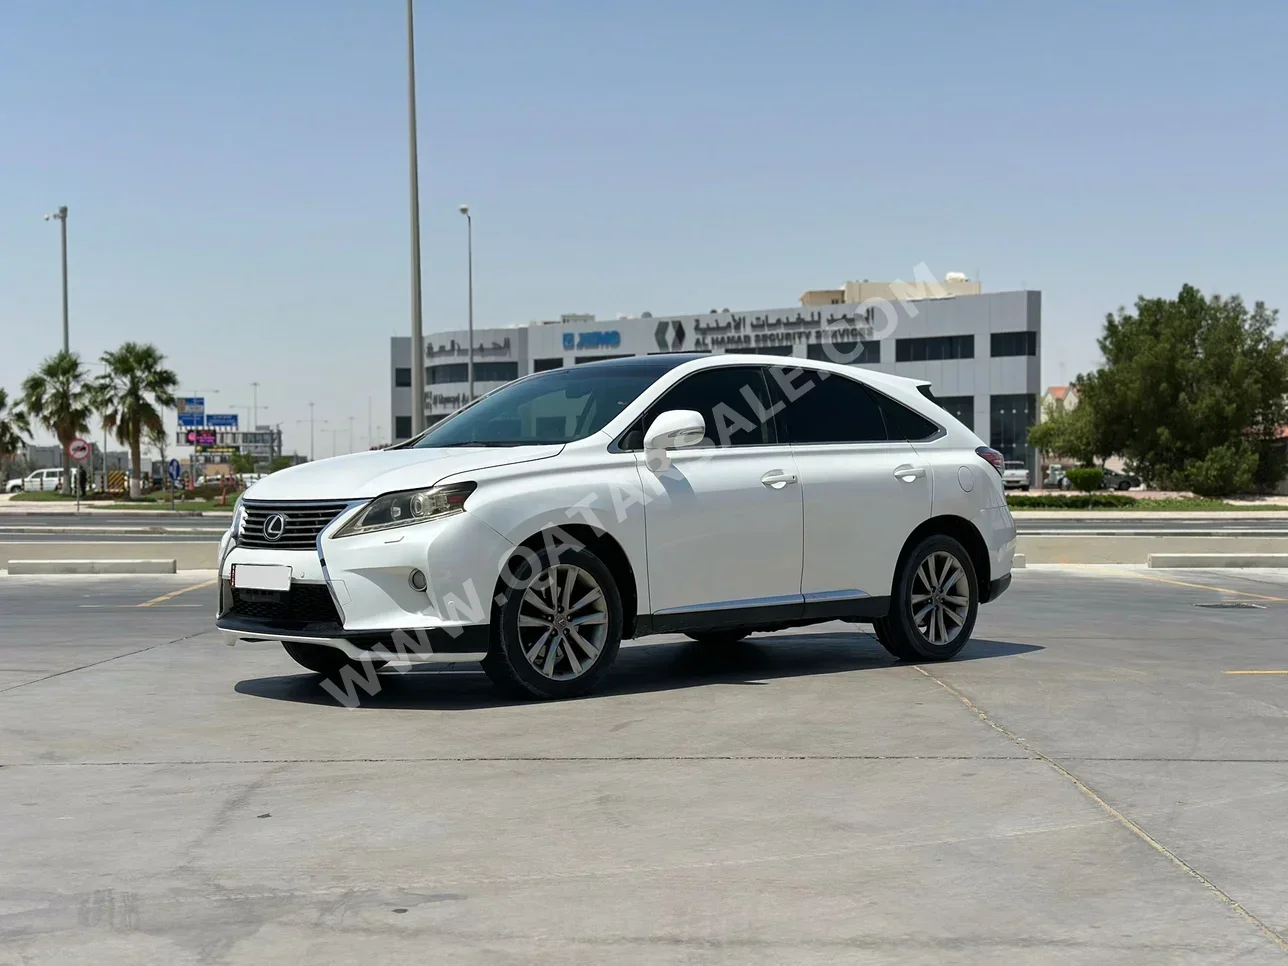 Lexus  RX  350  2013  Automatic  292,000 Km  6 Cylinder  Four Wheel Drive (4WD)  SUV  White